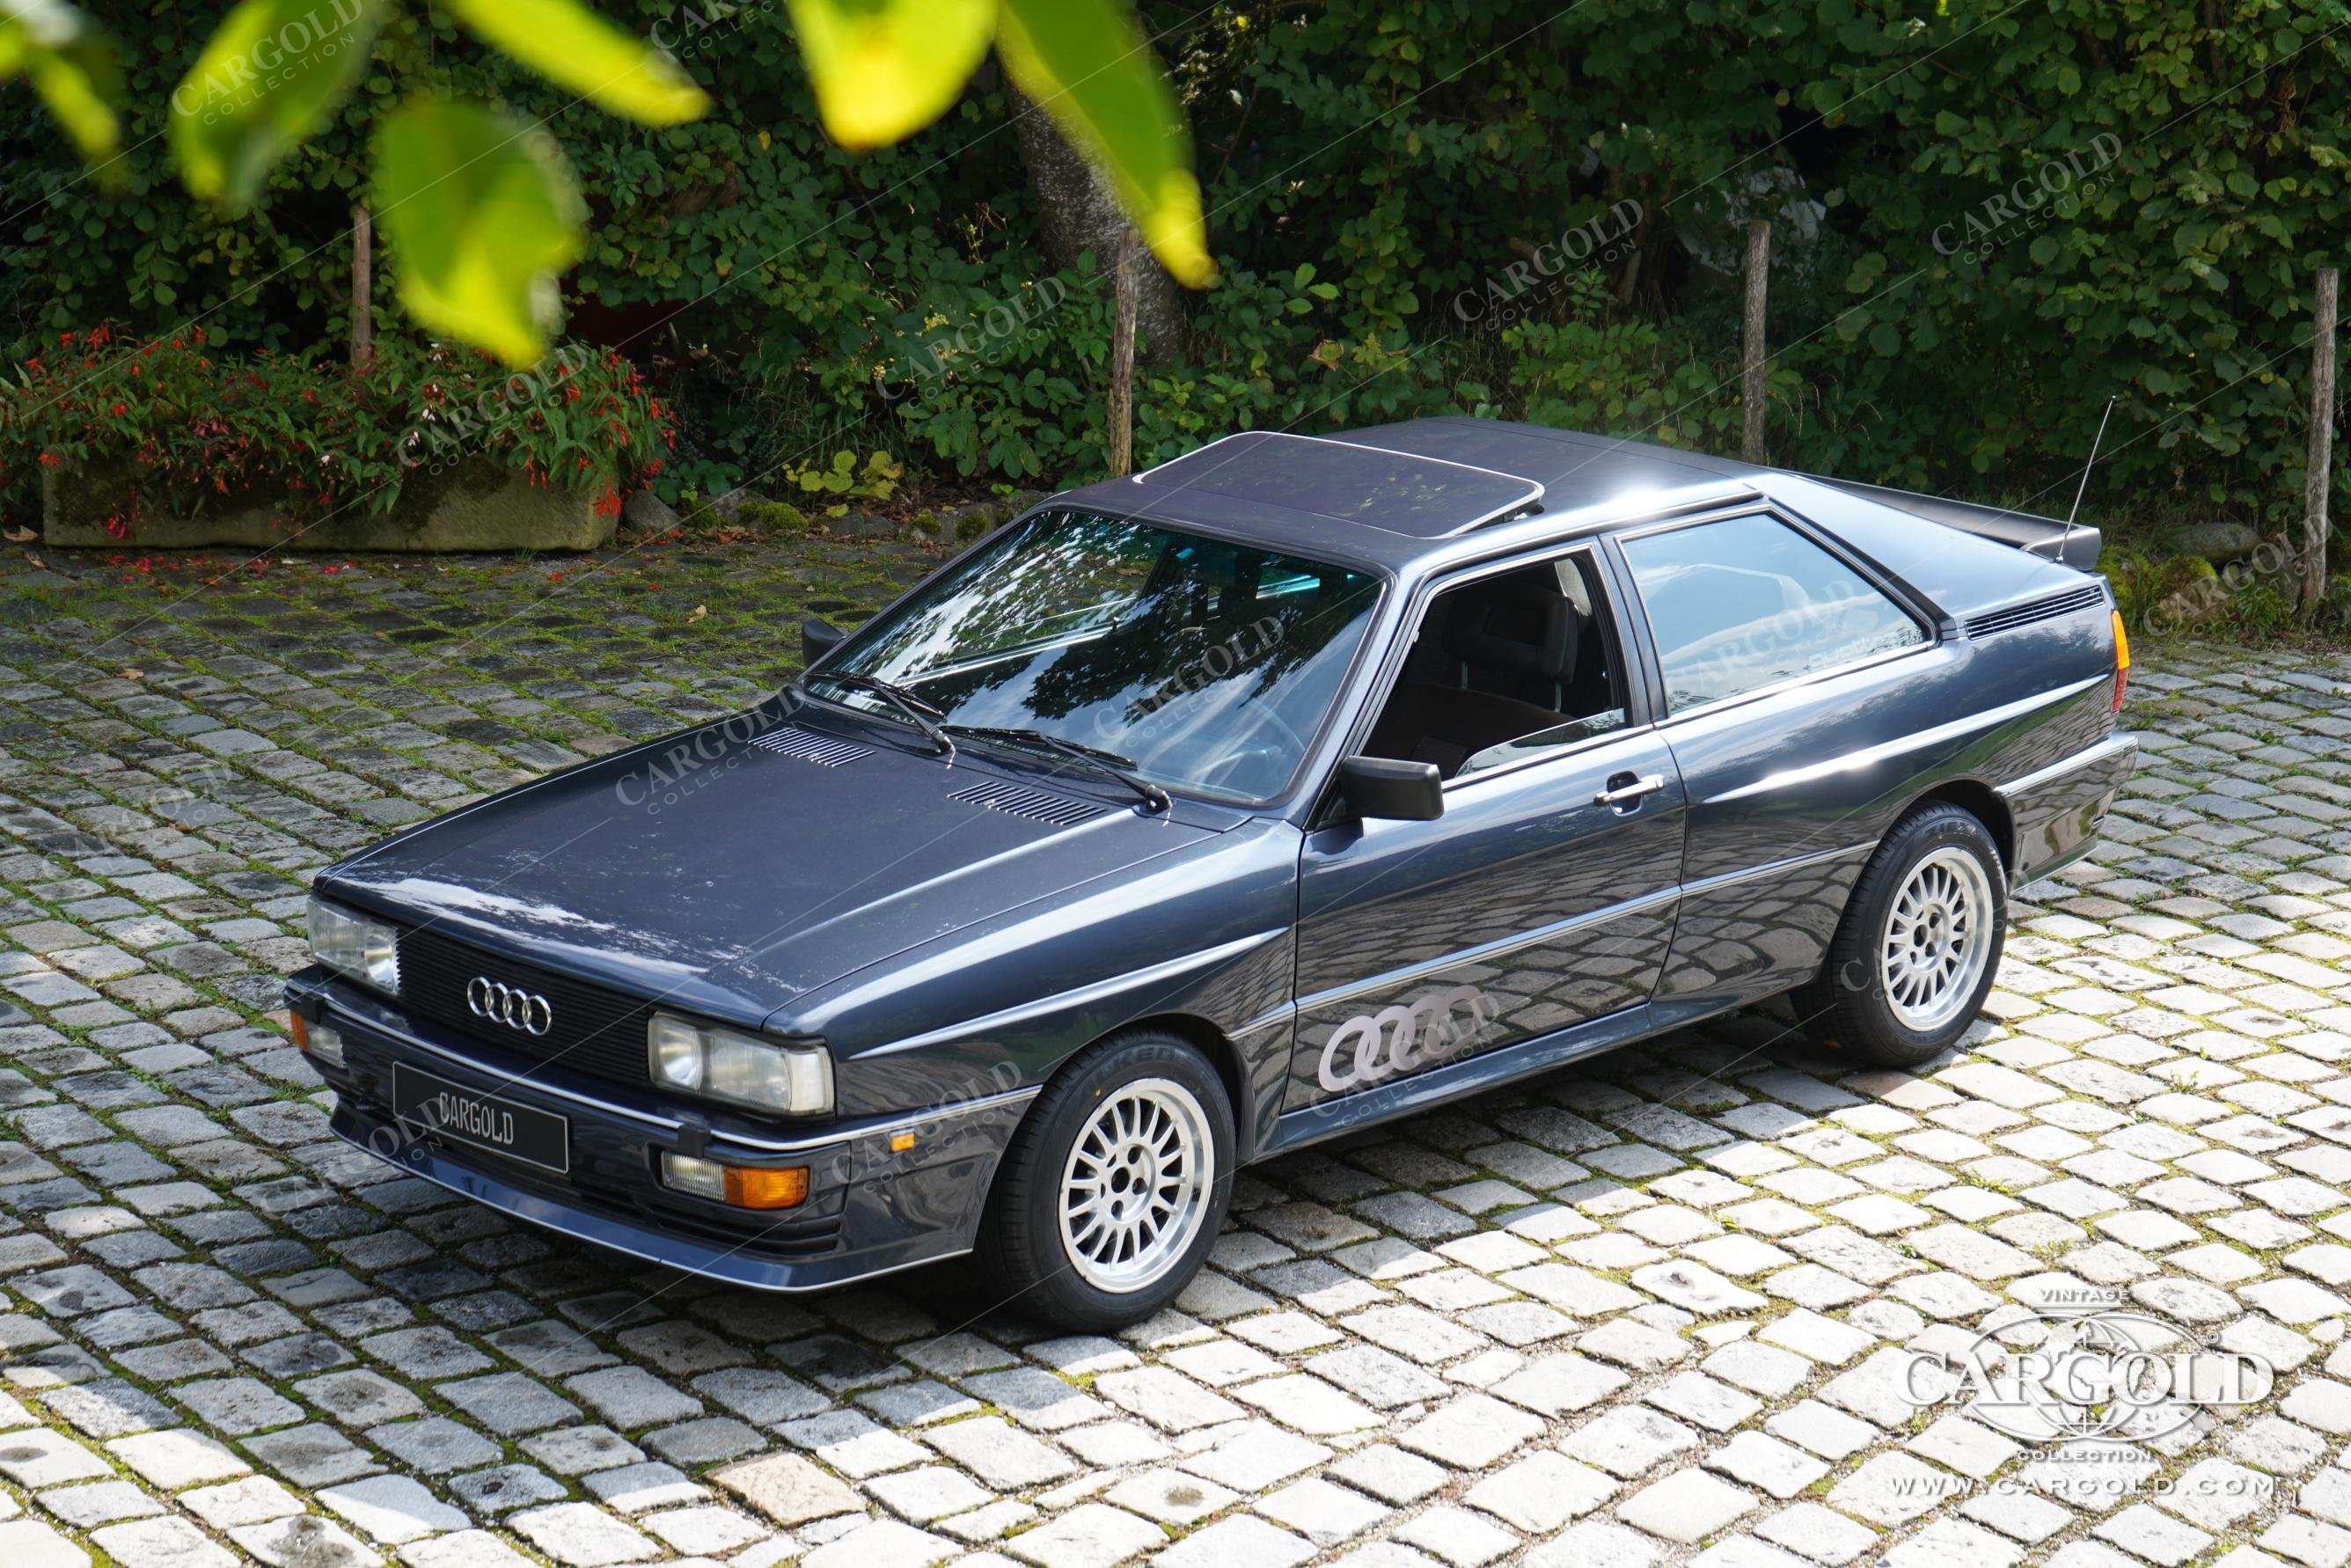 Audi Urquattro Coupe by Cargold